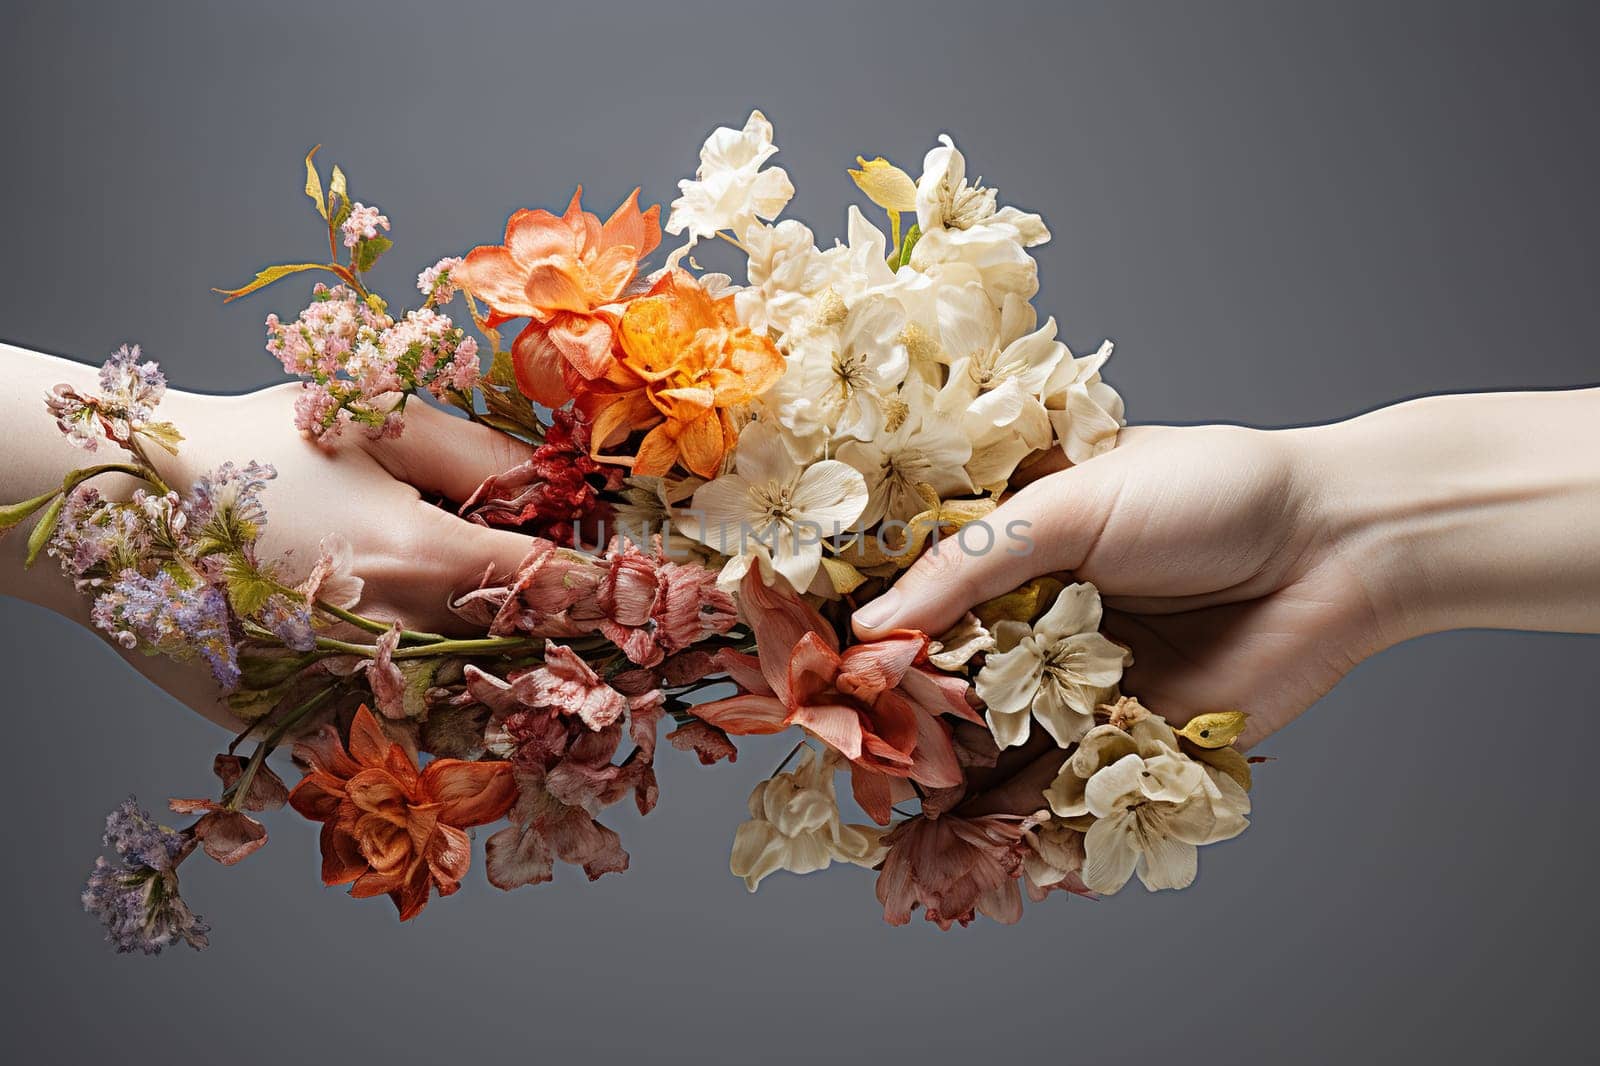 Contact of two hands with flowers between them on a gray background.